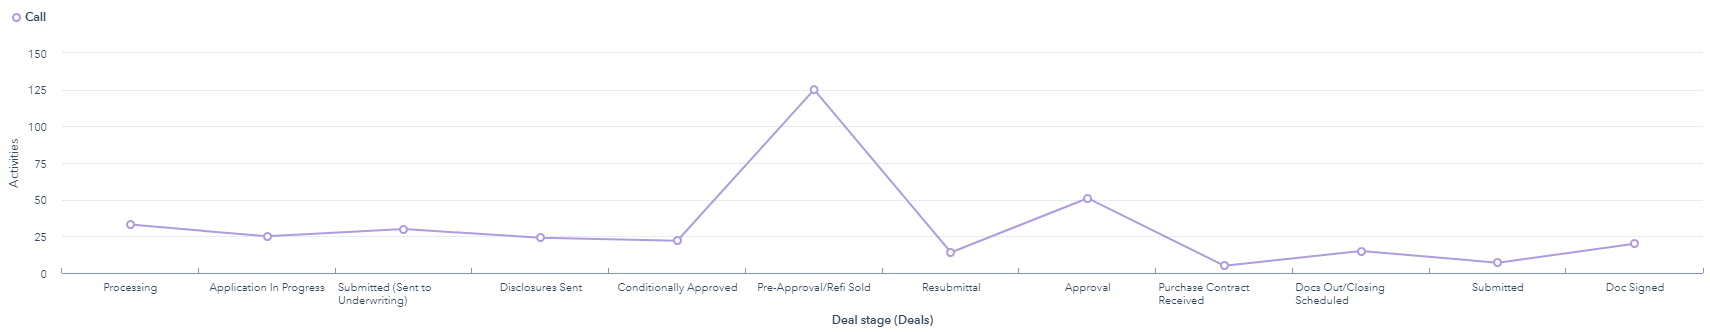 USM Average calls by deal stage